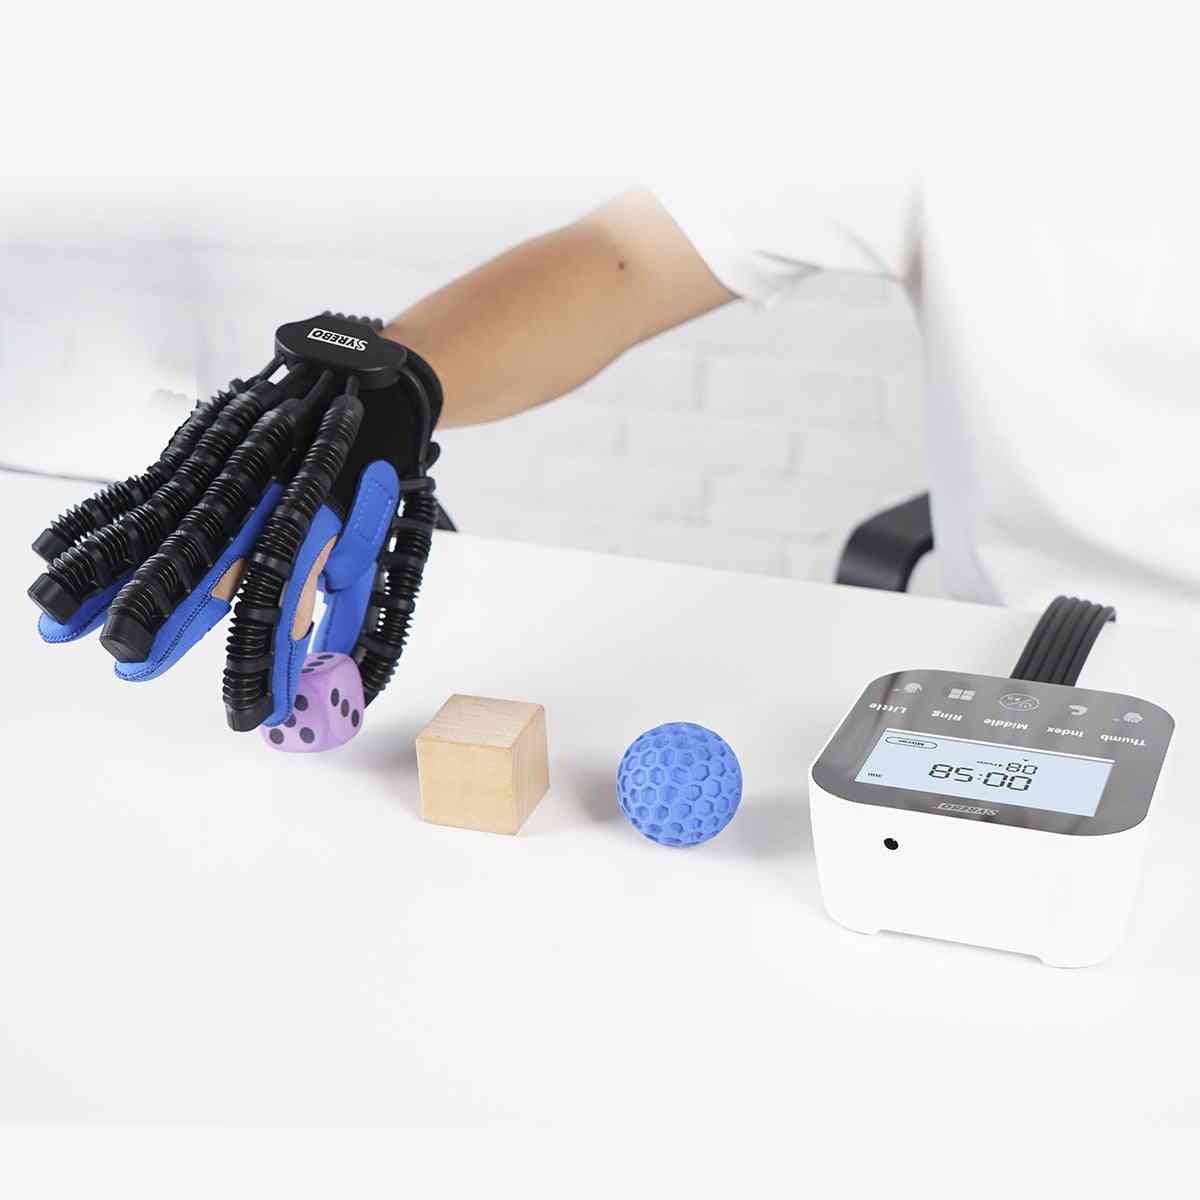 Syrebo C12 Hand Therapy Gloves for Stroke Patients